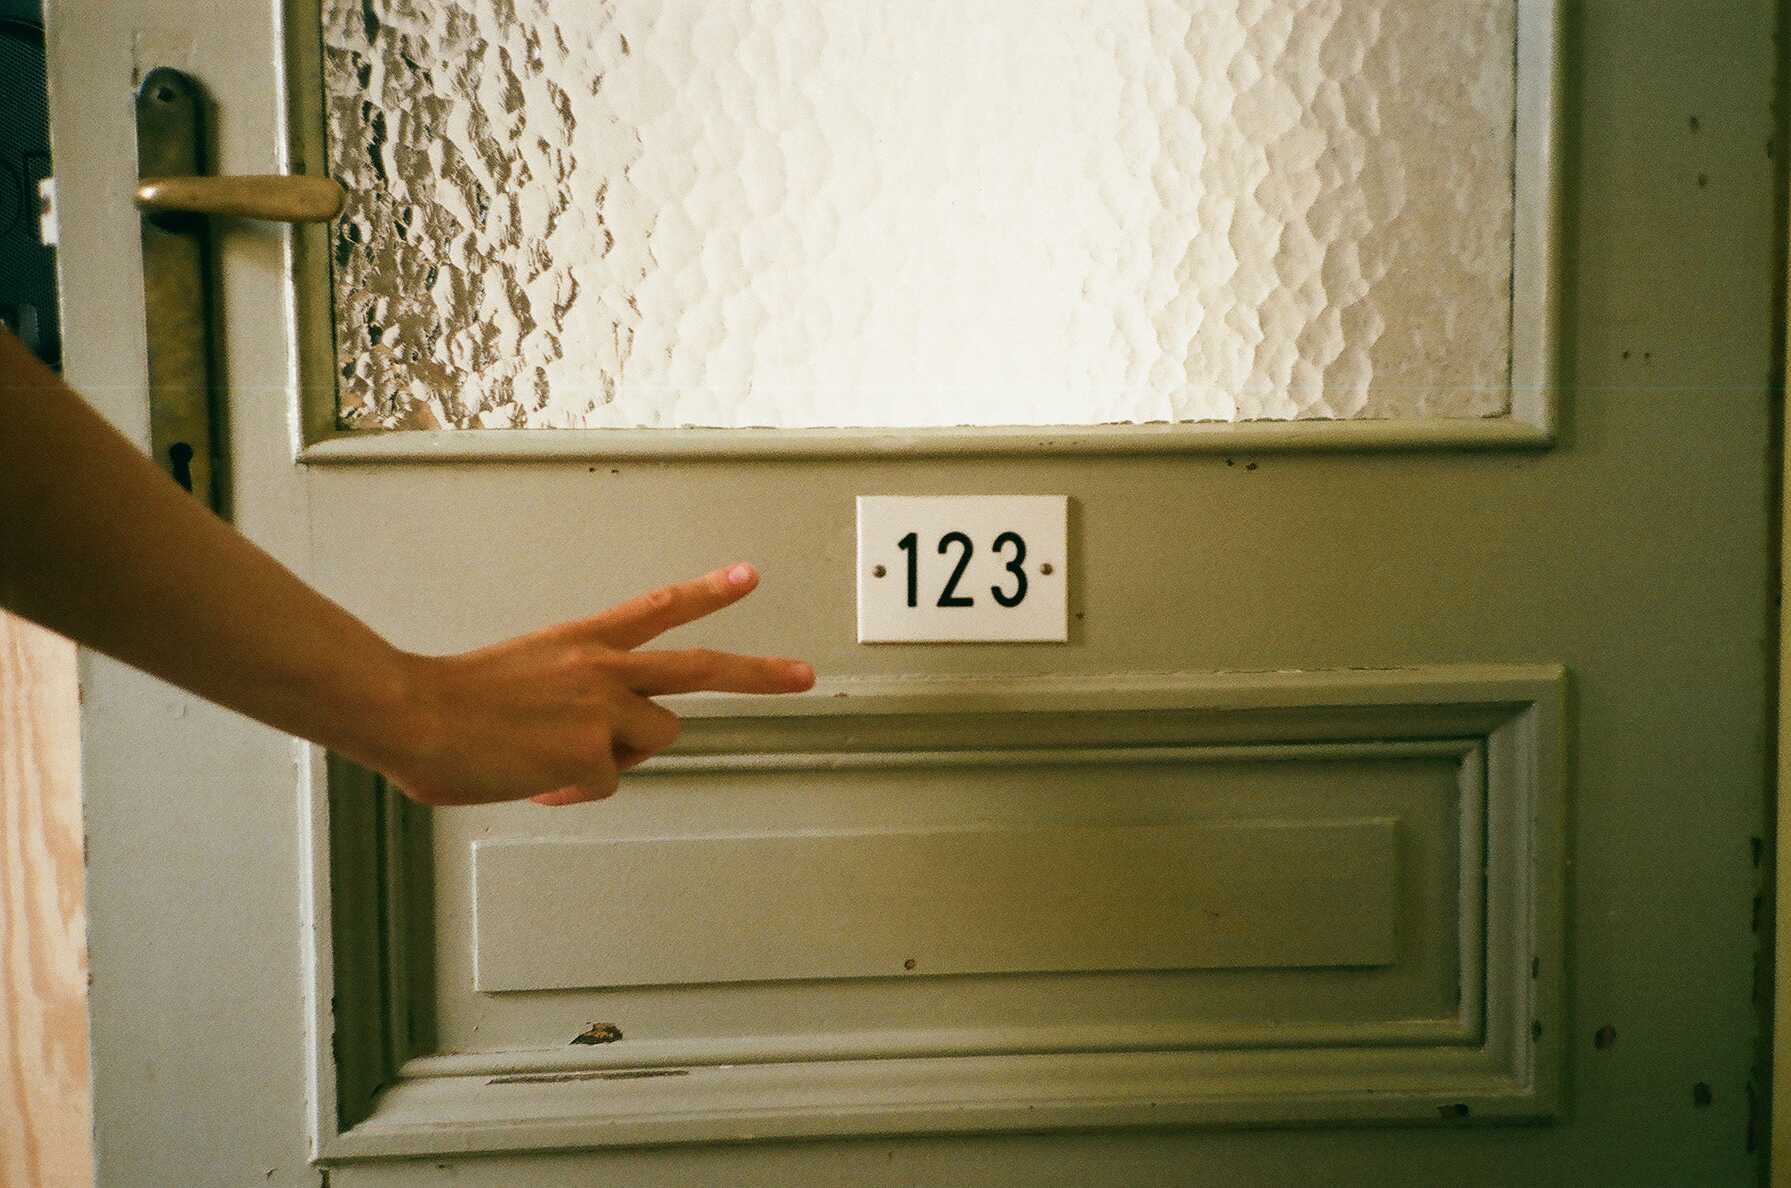 person's hand holding a peace sign under a sign on door that reads 123